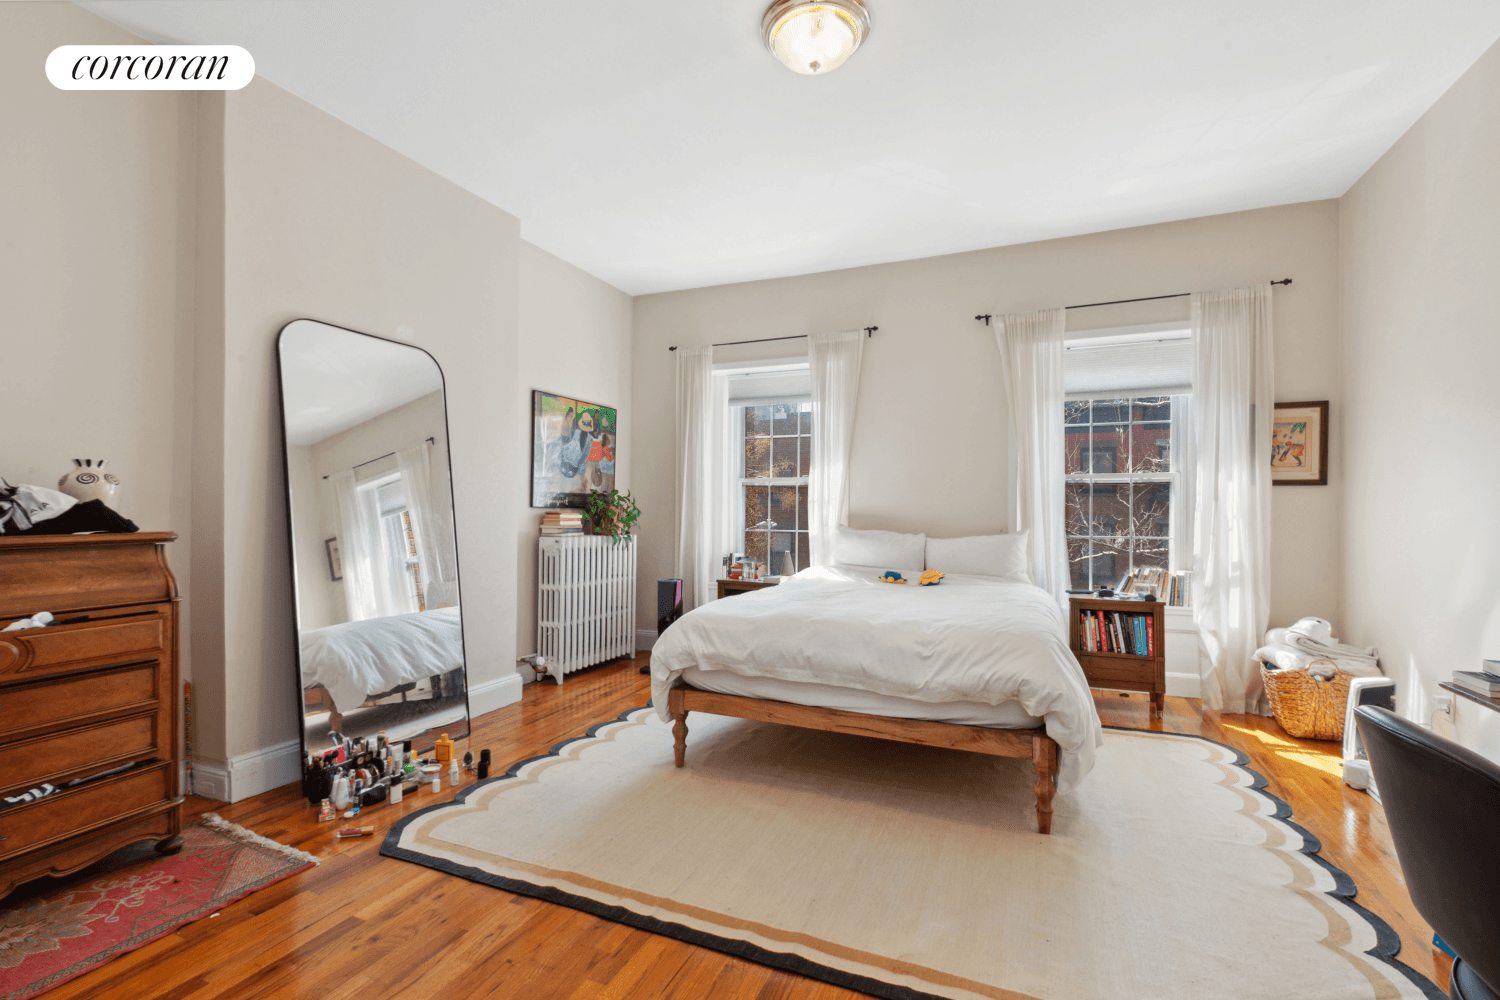 Welcome to 327 Union Street, a charming 2 family brownstone featuring an Upper and Lower duplex.